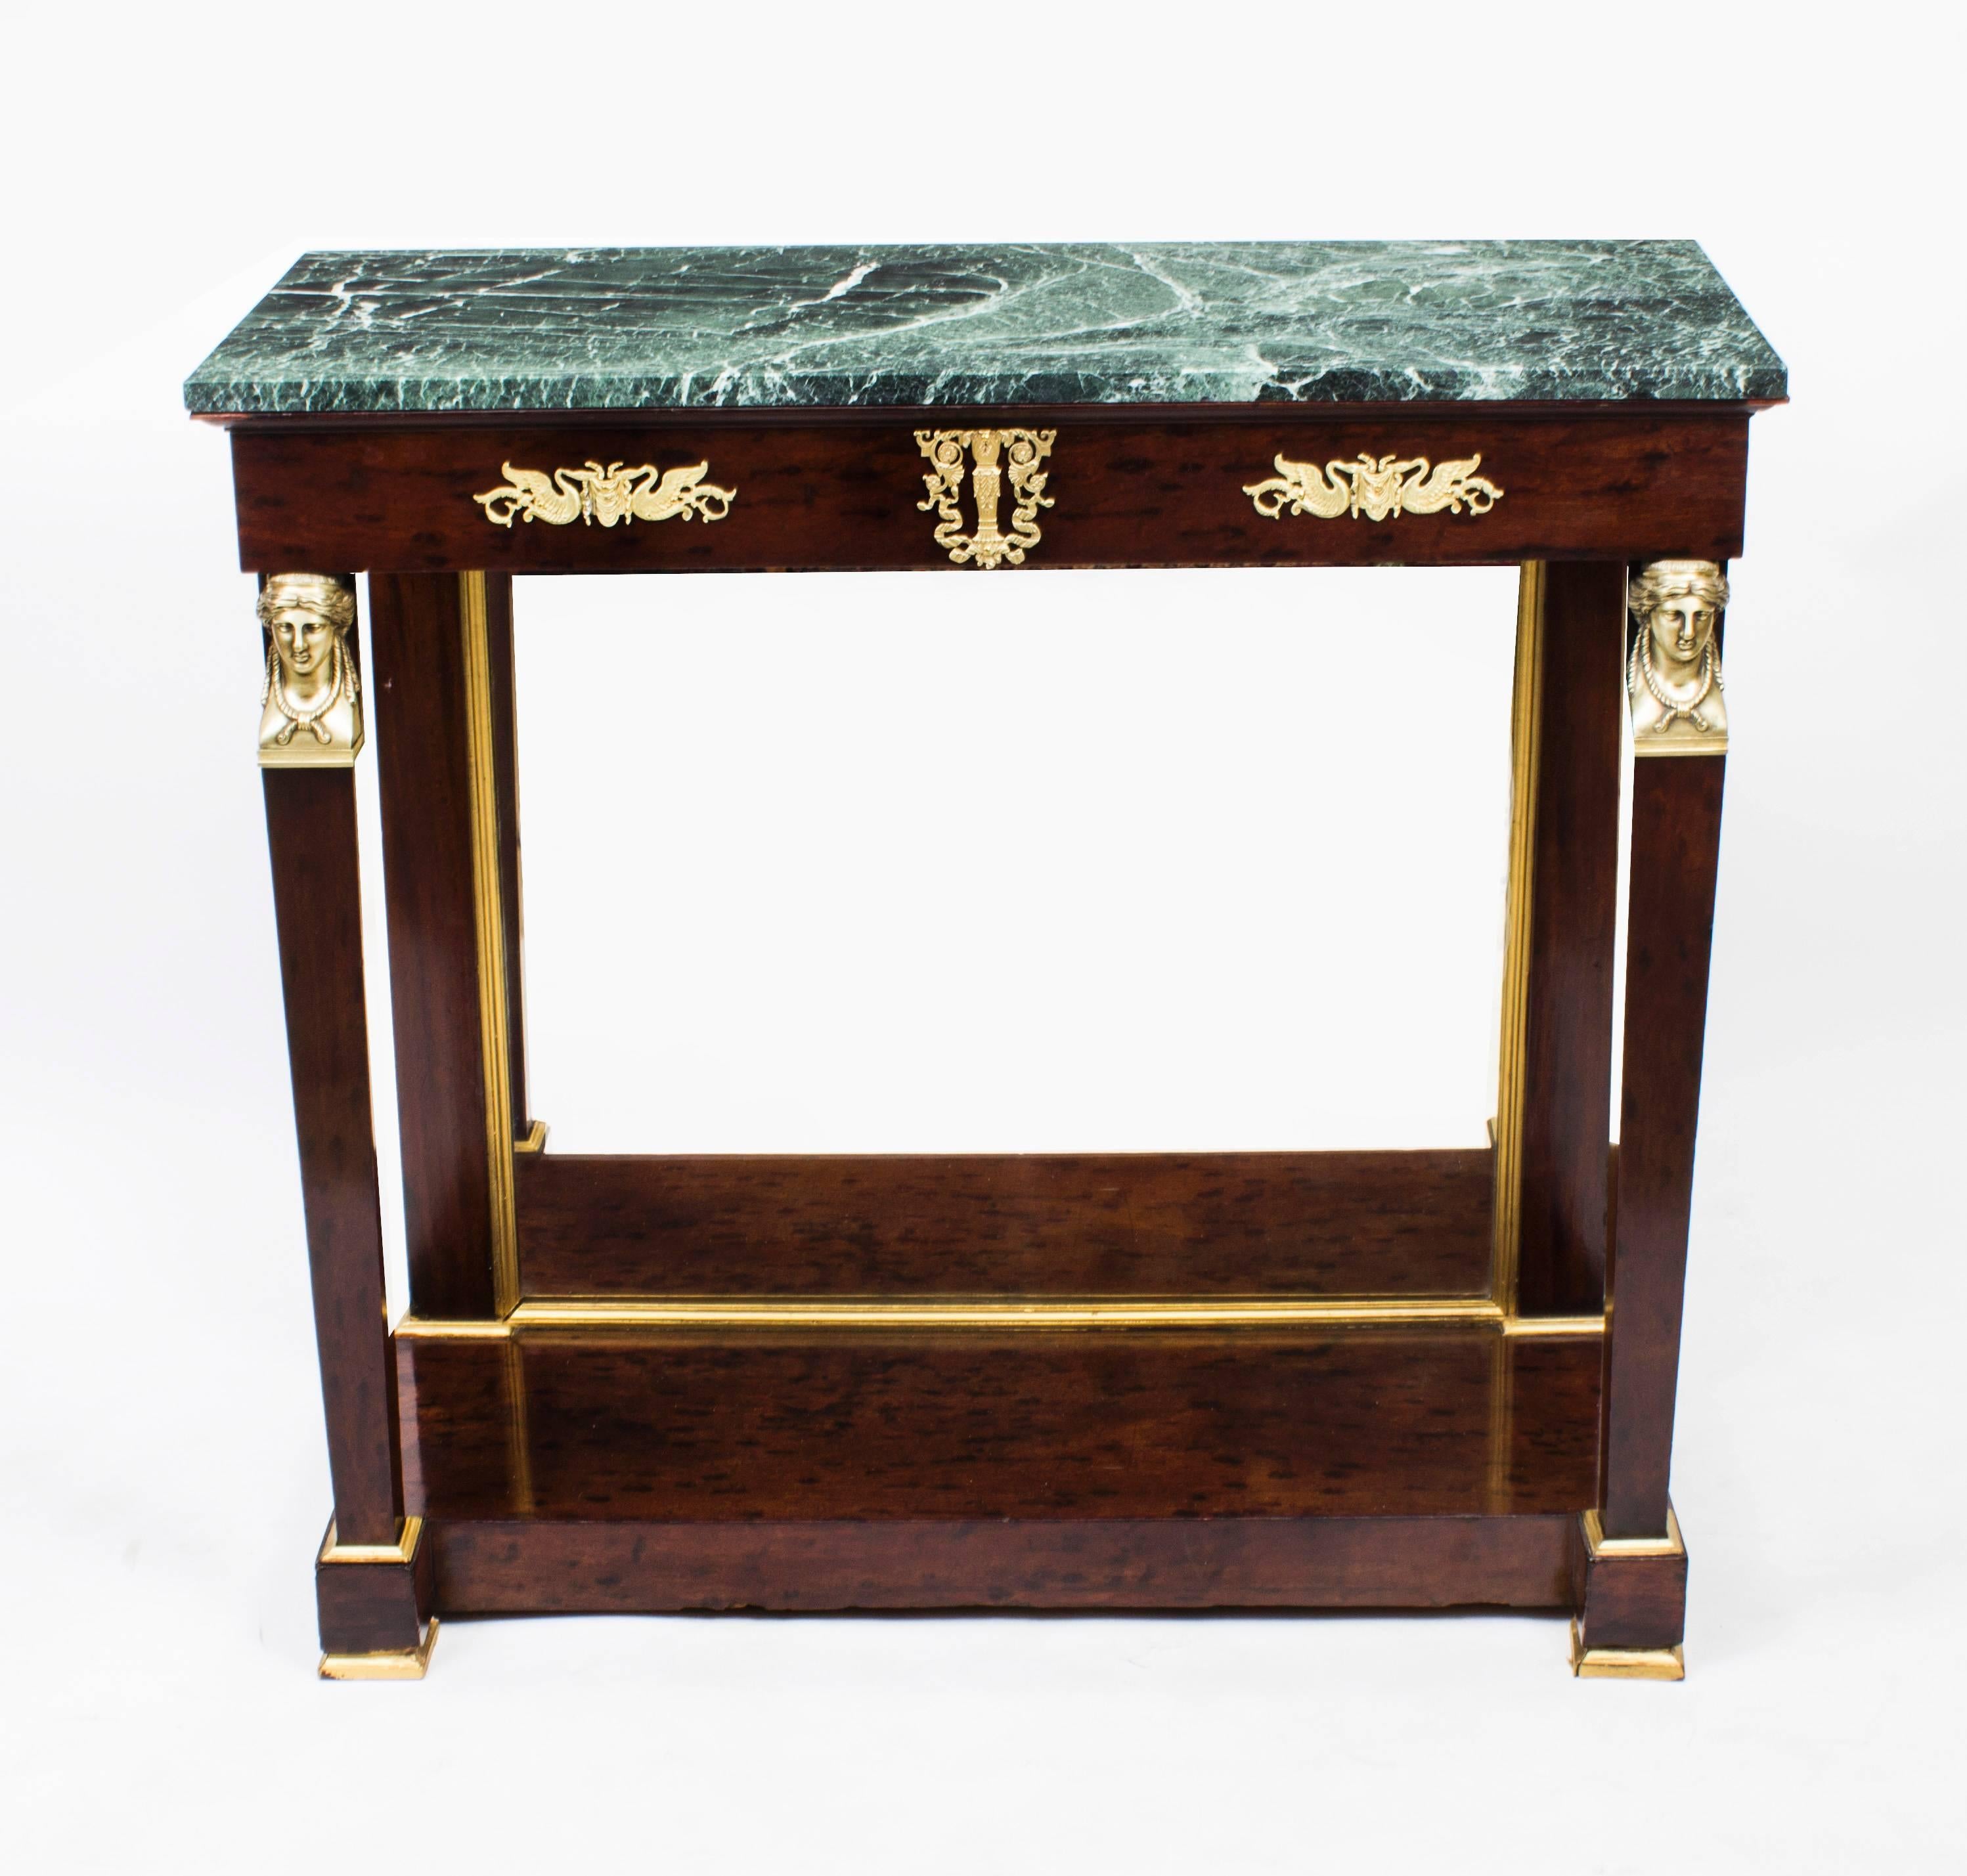 This is a beautiful antique French Empire flame mahogany and ormolu-mounted console table with a striking Verde Antico green marble-top, circa 1810 in date.

The table has wonderful decorative ormolu classical sphynx heads above each front leg. It